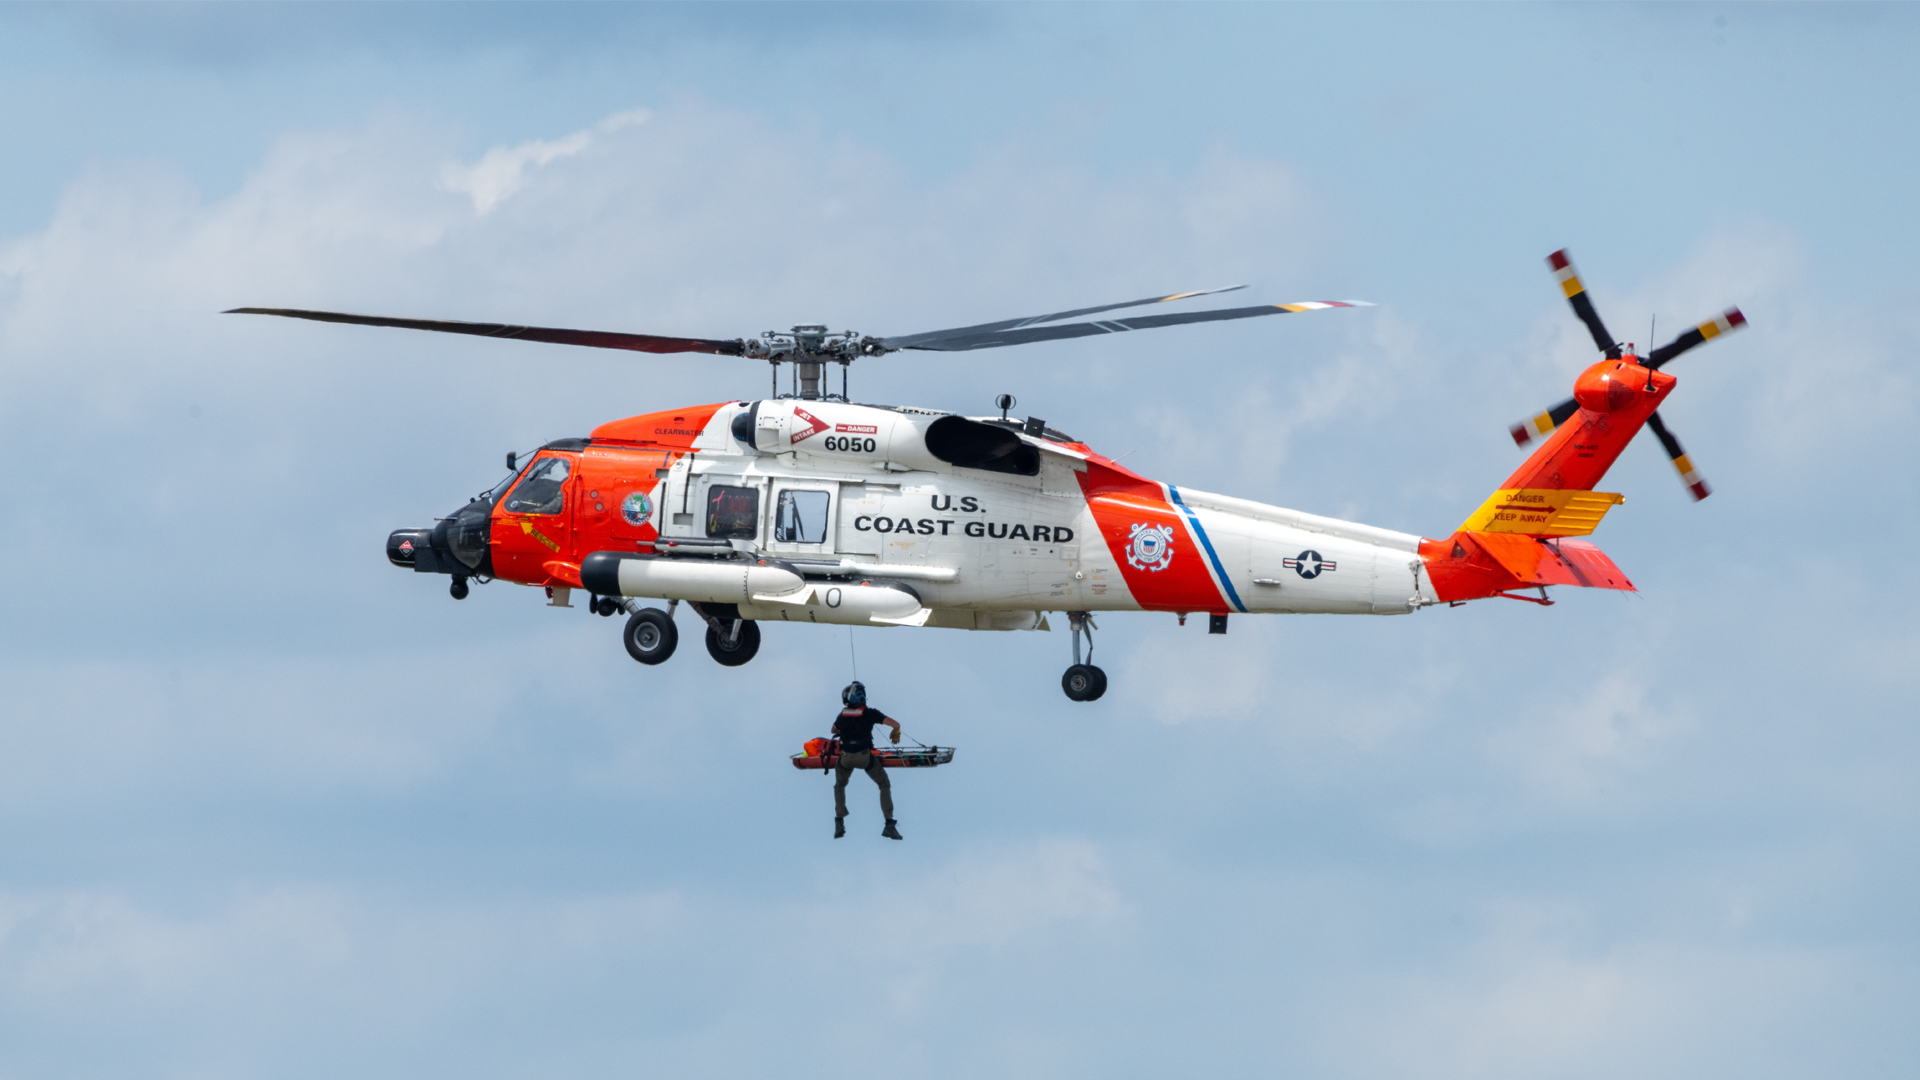 The U.S. Coast Guard: Diplomacy, Law and Security